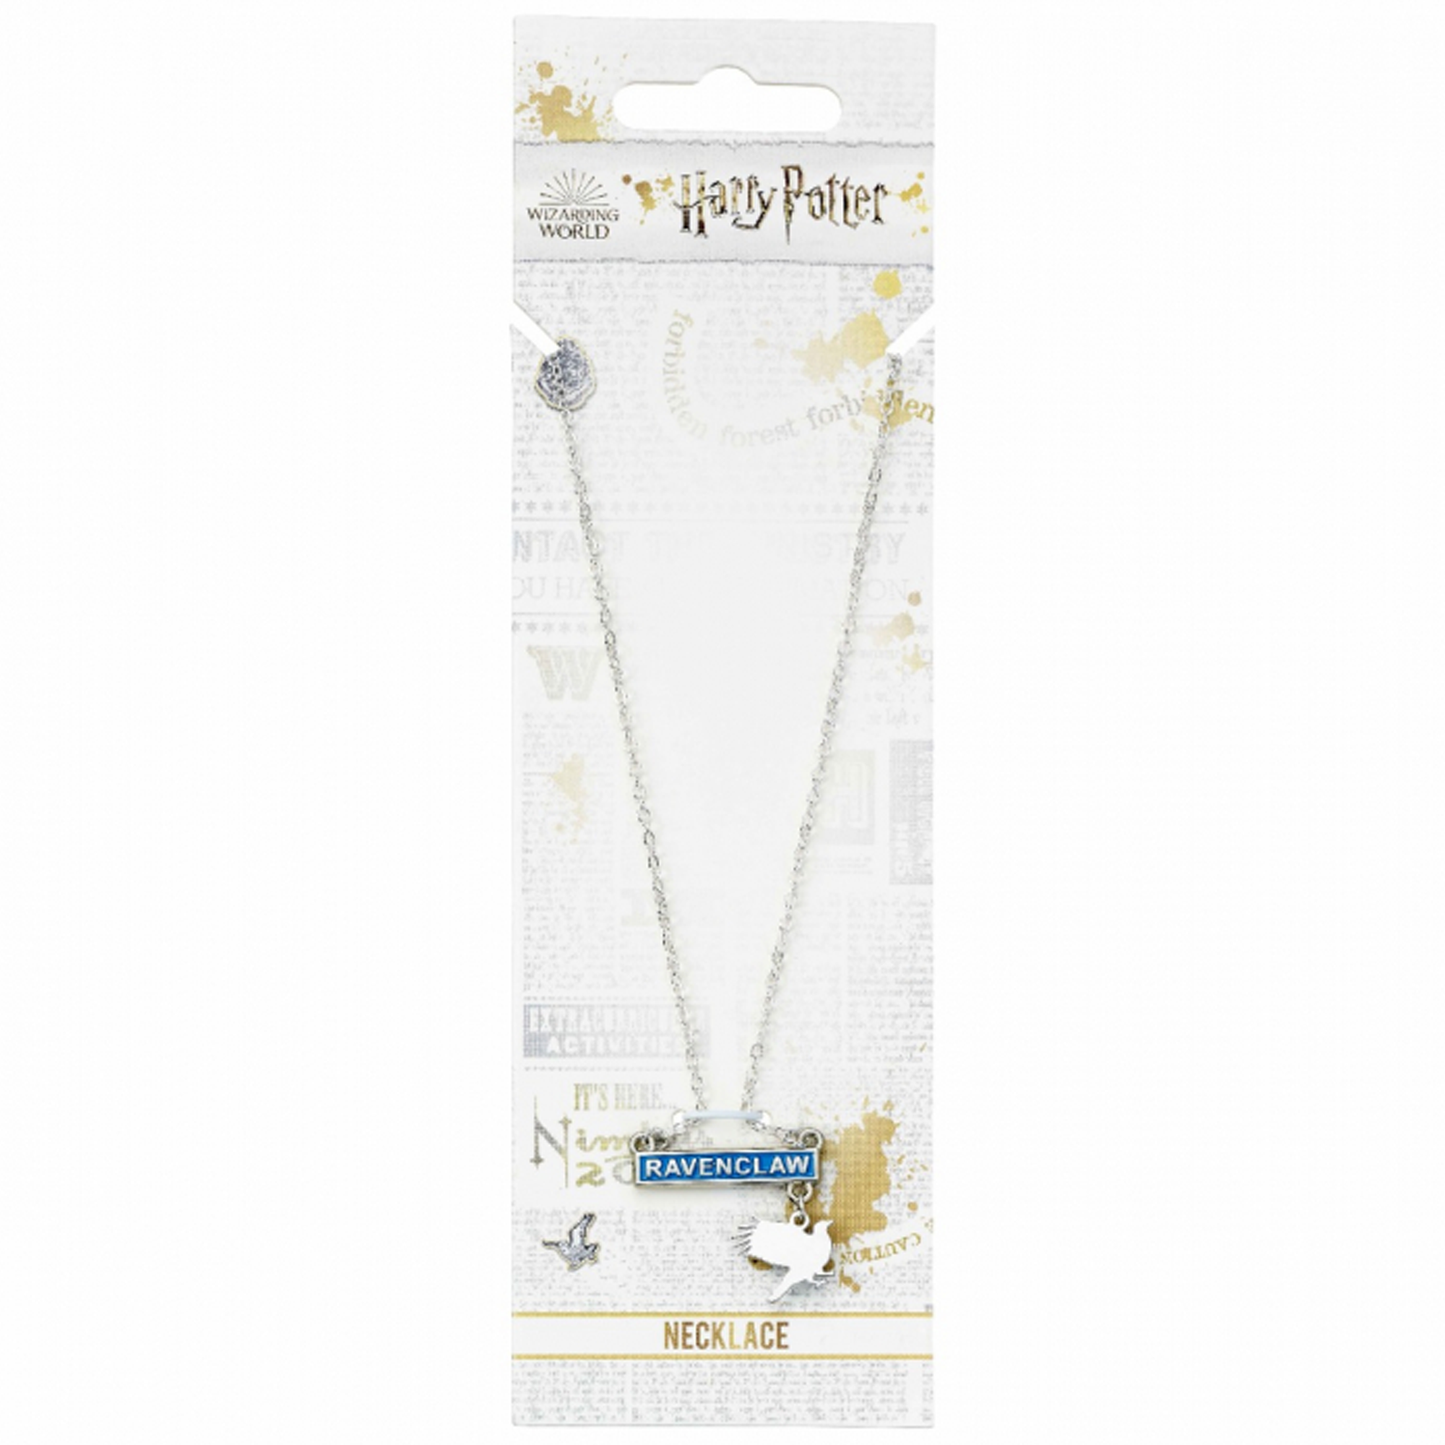 Ravenclaw - Harry Potter Hogwarts House Bar Necklace (in Packaging) | Happy Piranha